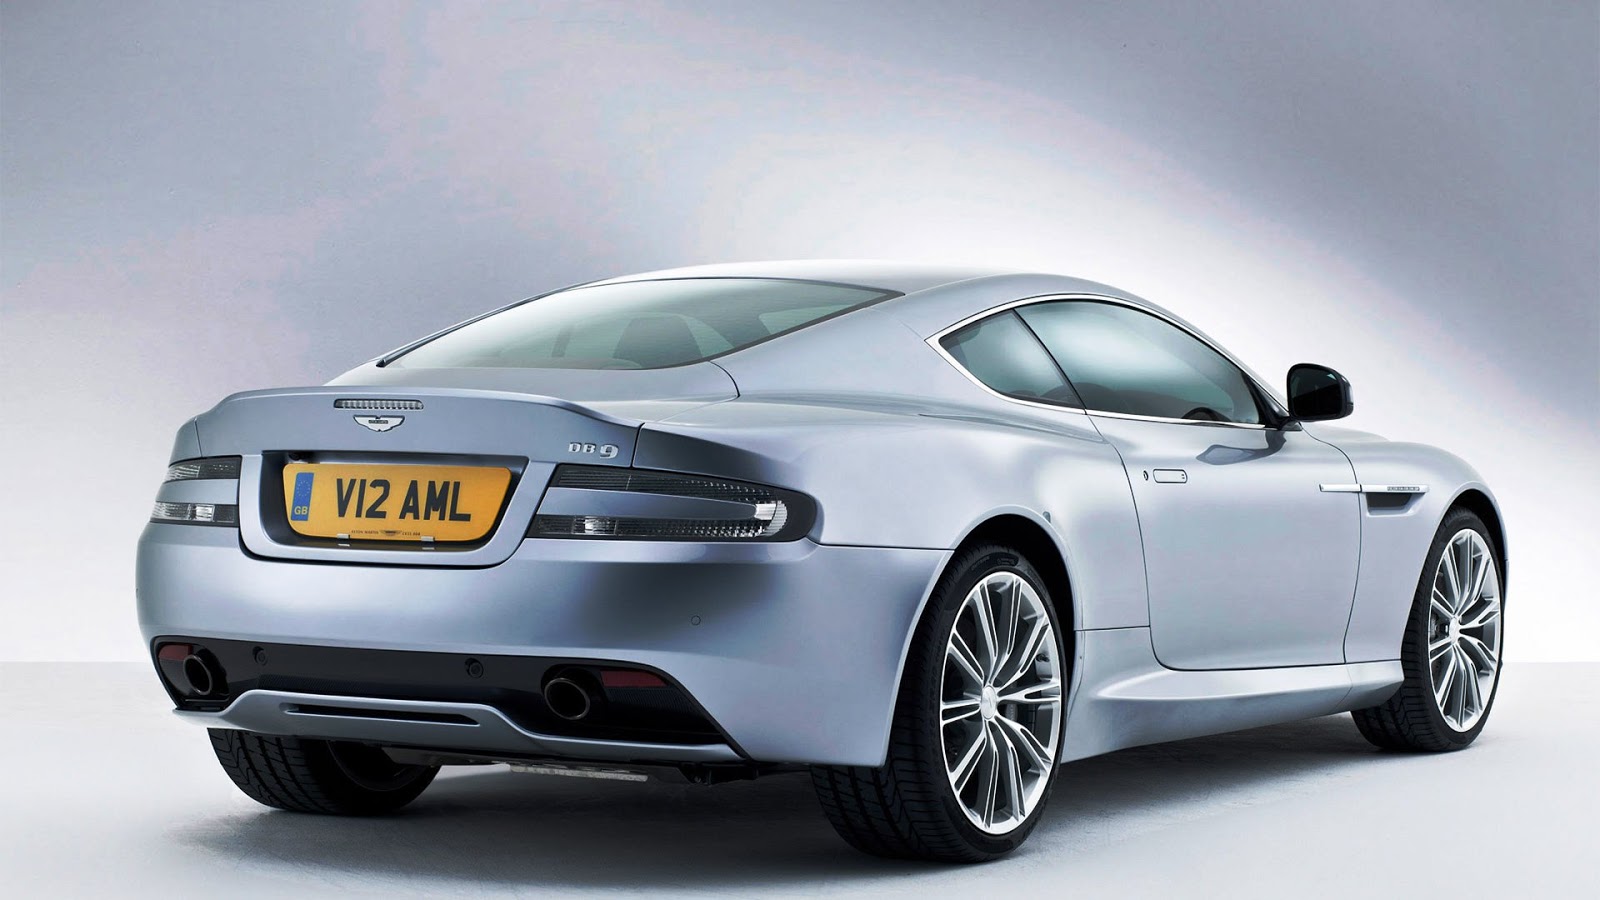 2012 Aston Martin DB9 with Gallery Wallpaper Pictures ~ Sheryali ...